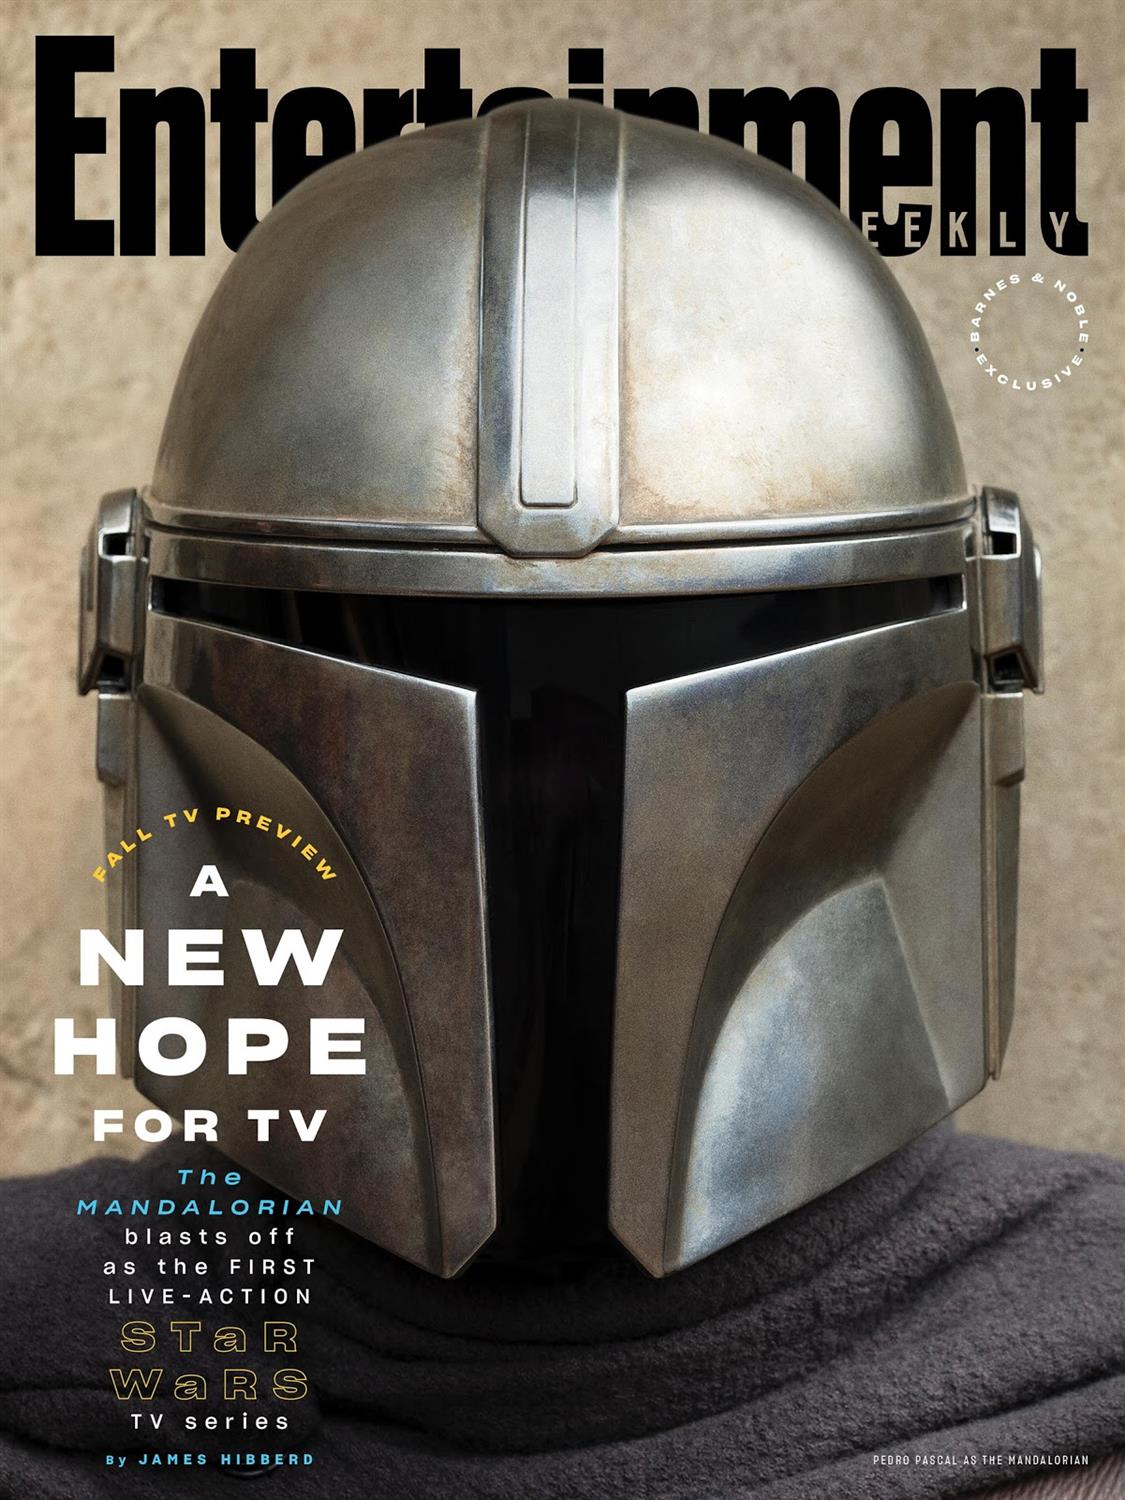 the-mandalorian-previewed-in-entertainment-weekly-with-new-photos-creative-team-interviews.jpg